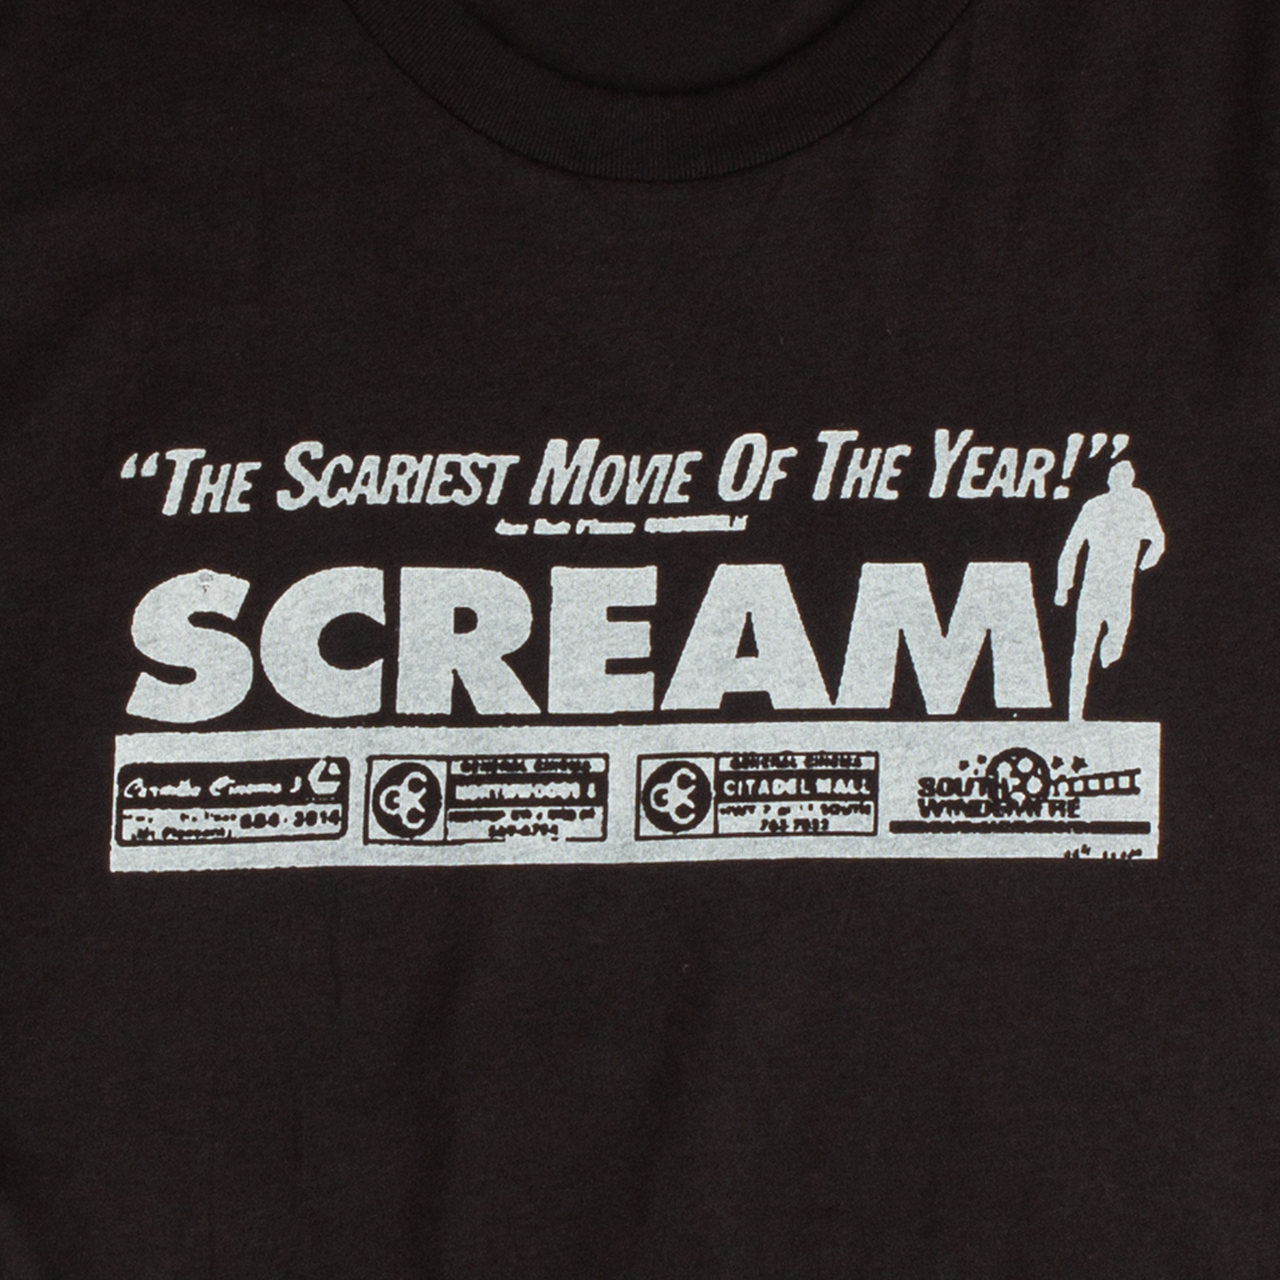 Scariest Shirt of the Year